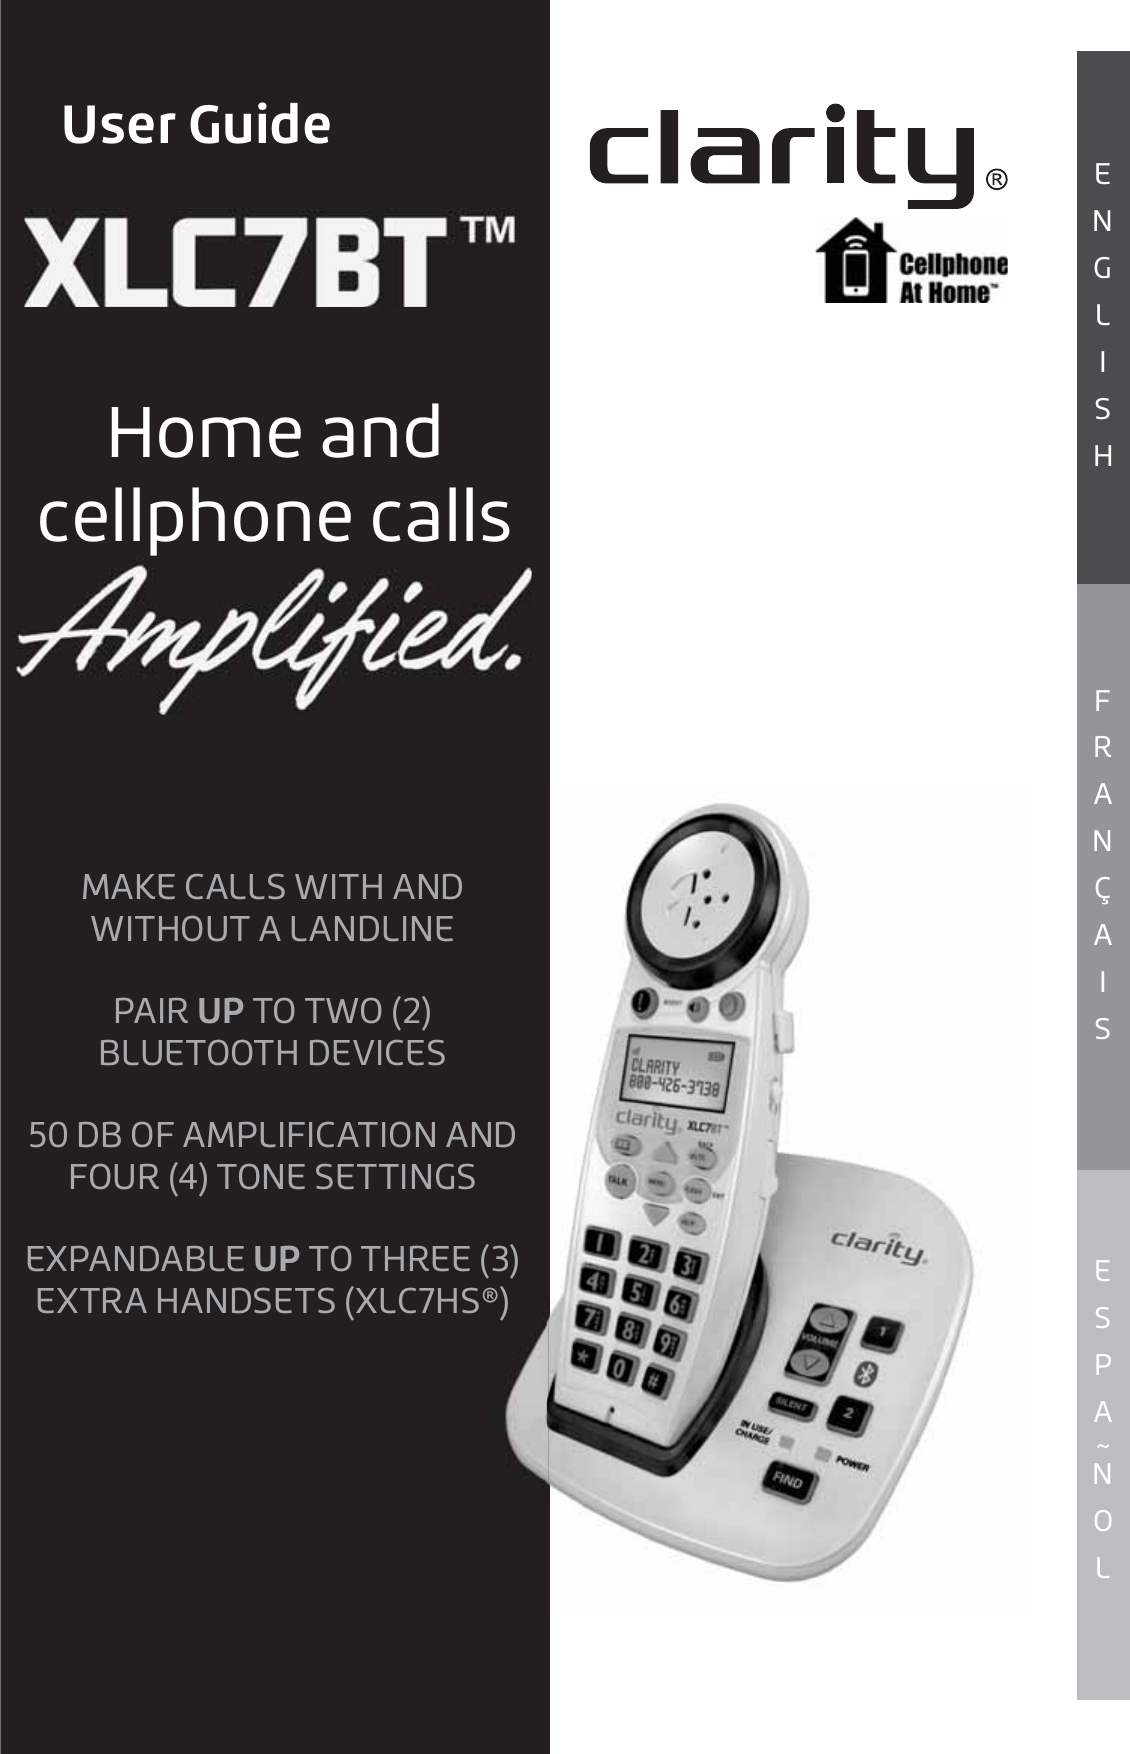 E S P A ~ N O LF R A N Ç A I SE N G L I S HUser GuideHome and cellphone callsMAKE CALLS WITH AND WITHOUT A LANDLINEPAIR UP TO TWO (2) BLUETOOTH DEVICES50 DB OF AMPLIFICATION AND FOUR (4) TONE SETTINGSEXPANDABLE UP TO THREE (3) EXTRA HANDSETS (XLC7HS®)